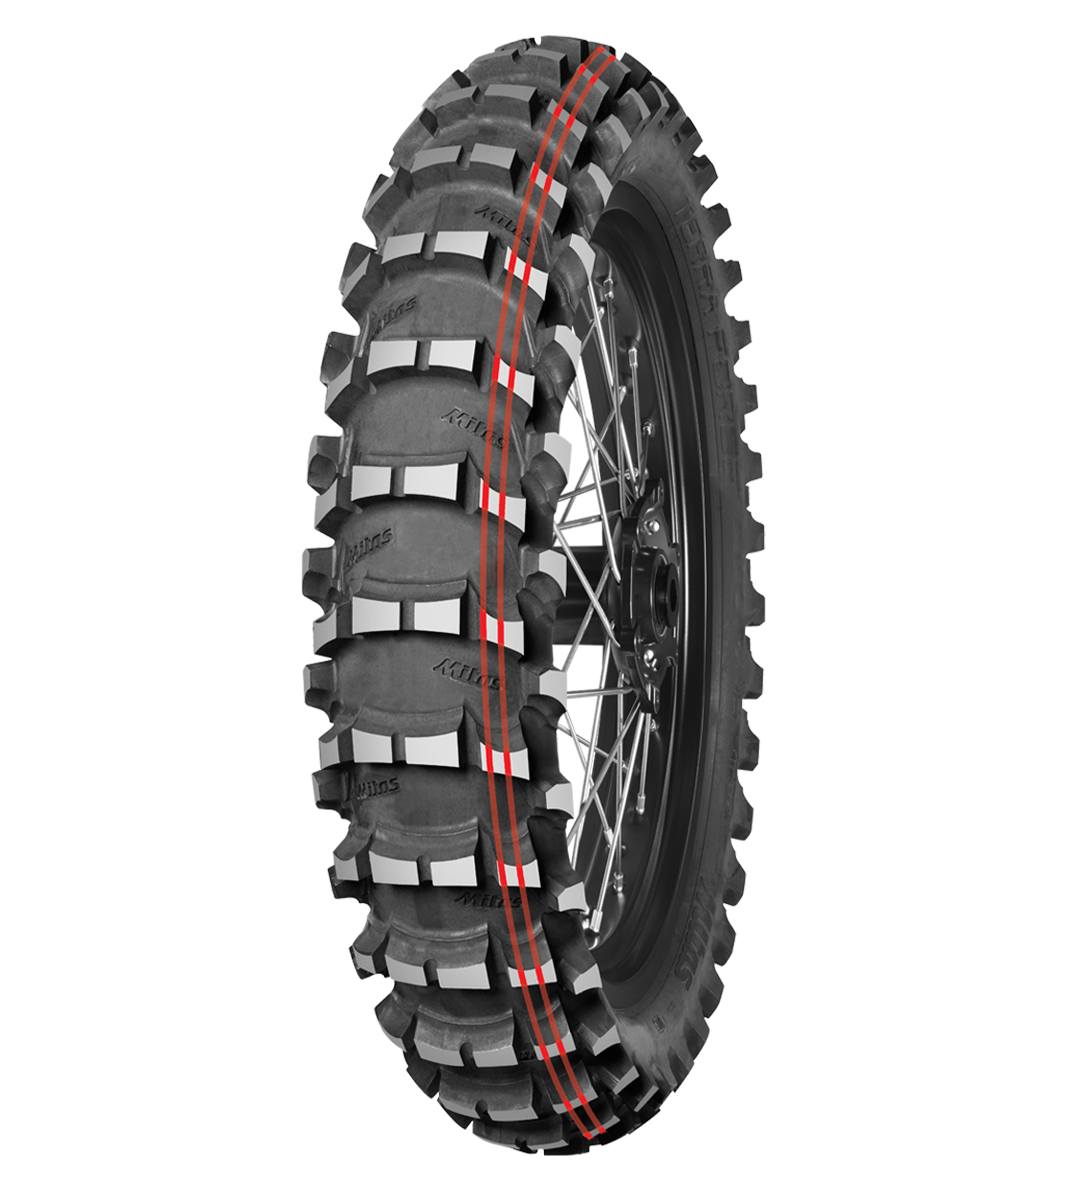 Mitas TERRA FORCE-MX Sand 120/80-19 Motocross Competition Off-Road Sand 63M 2 Red Tube Rear Tire, 226517, 120/80-19, Motocross, Motocross Competition, Off-Road, Rear, Terra Force, Terra Force-MX Sand, Trail, Tires - Imported and distributed in North &amp; South America by Lindeco Genuine Powersports - Premier Powersports Equipment and Accessories for Motorcycle Enthusiasts, Professional Riders and Dealers.